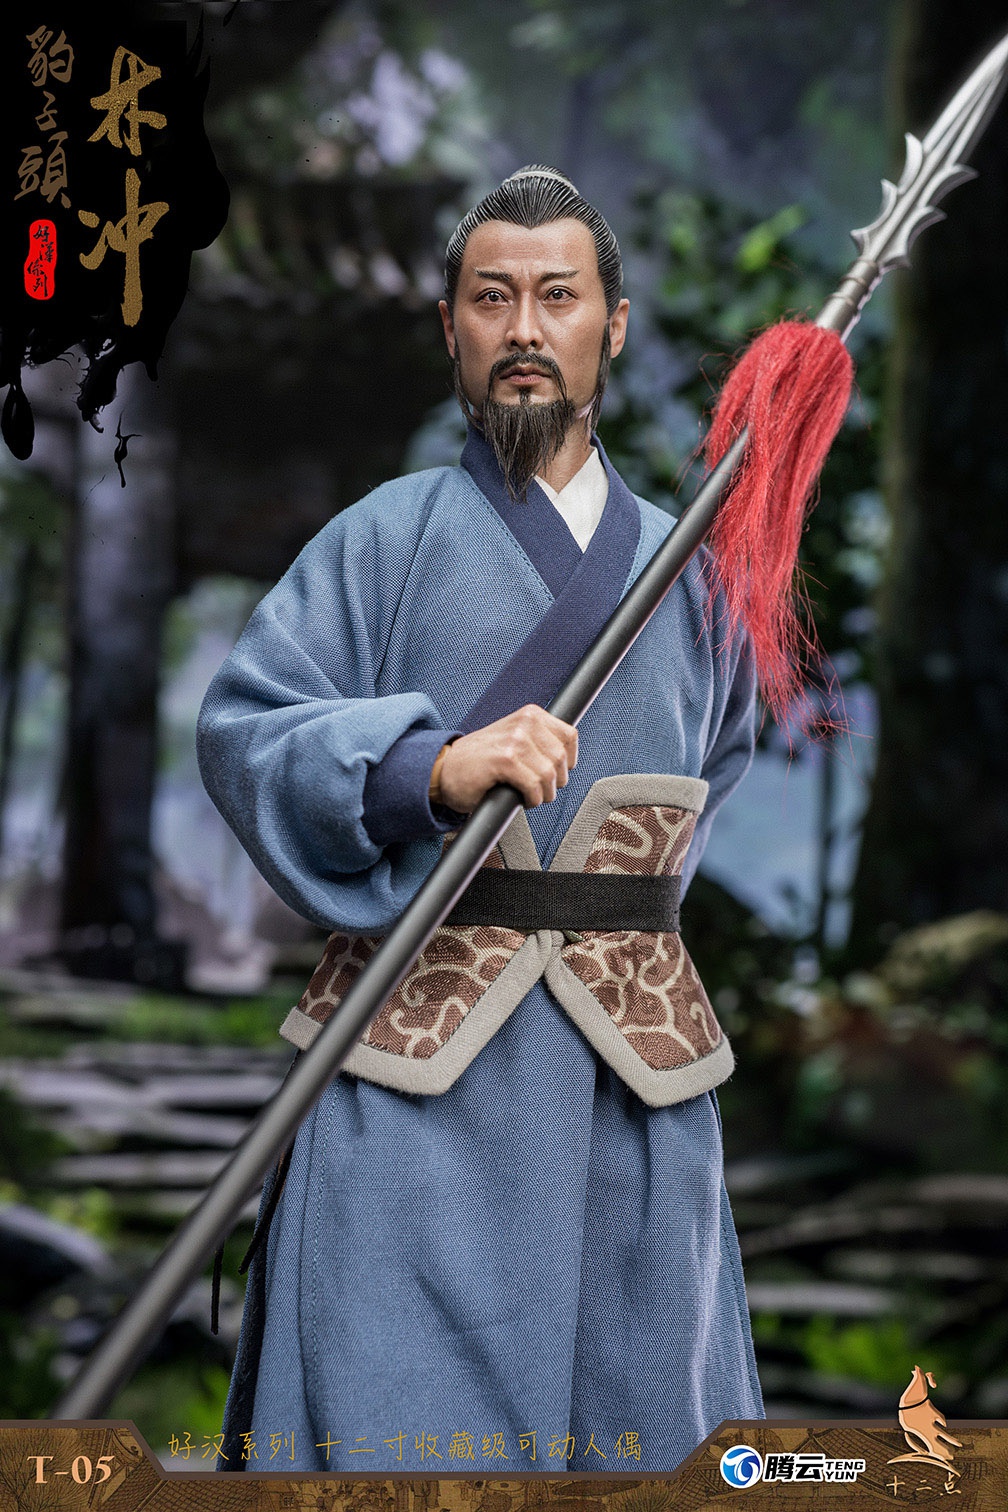 NEW PRODUCT: Twelve - Hero Series - Leopard Head Lin Chong Fengxue Mountain Temple Action Figure (T-05 /T-06) 07106